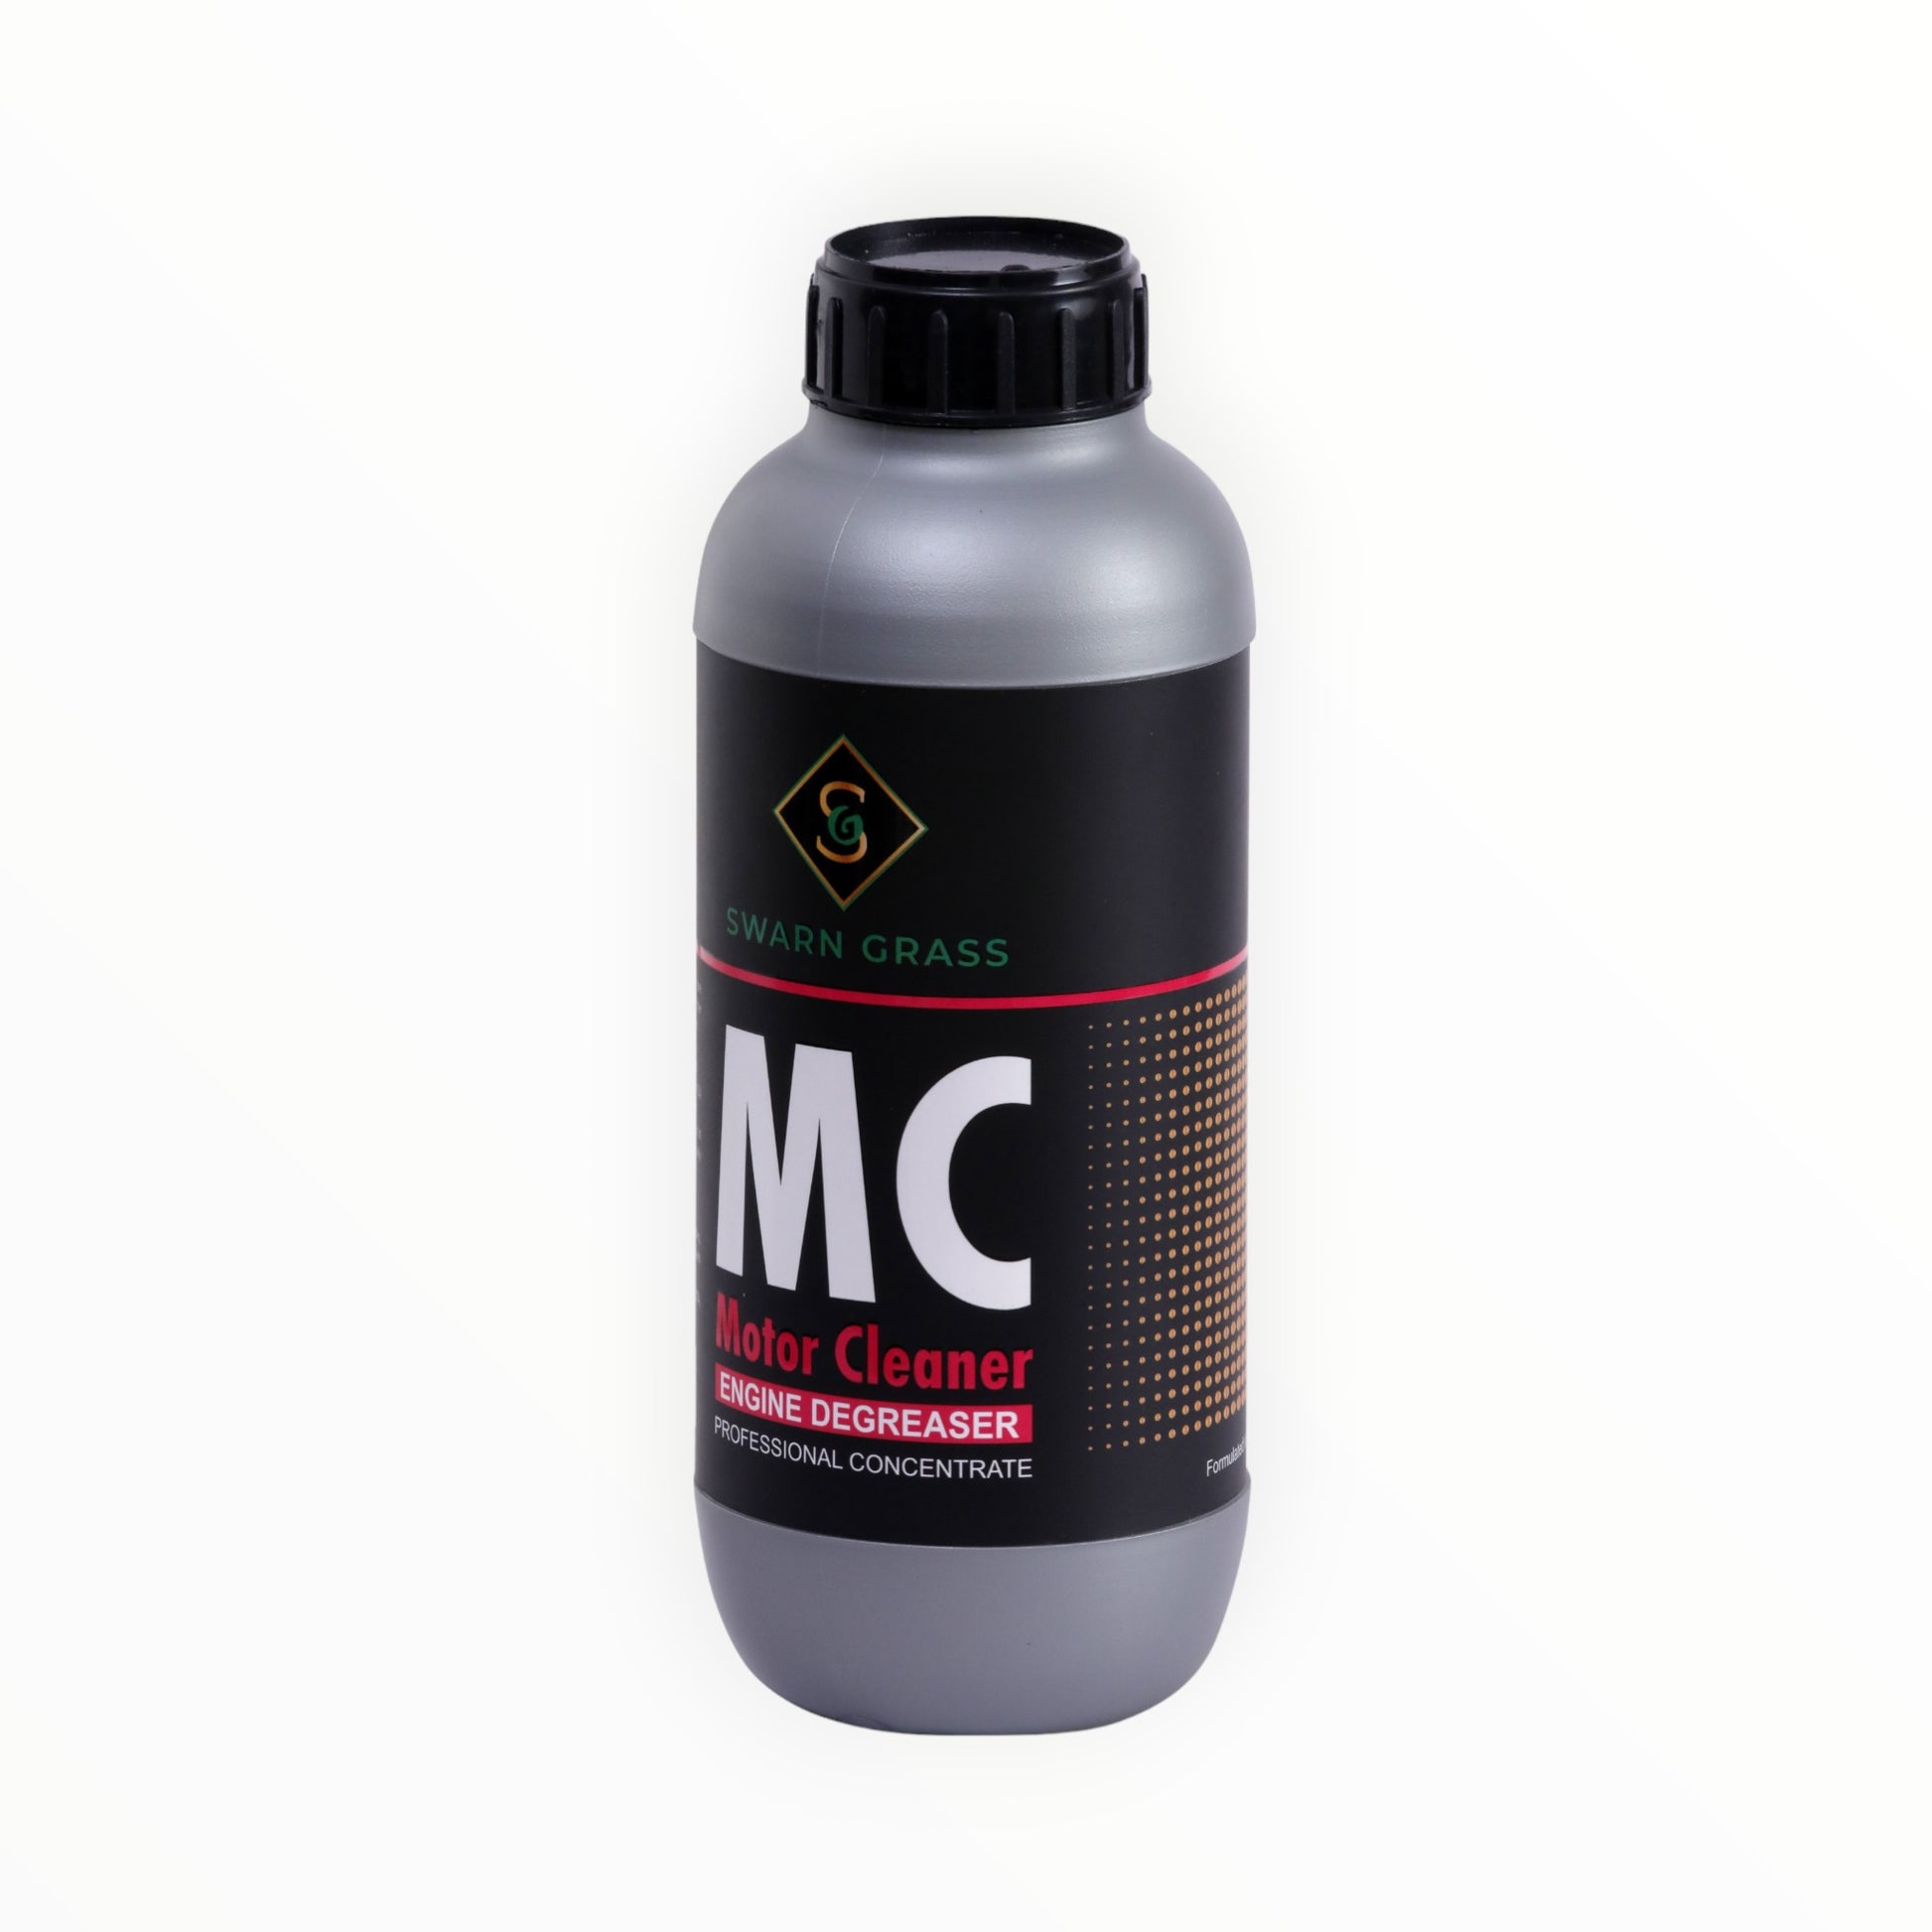 Motor Cleaner Engine Degreaser (Mc) Concentrate – SWARN GRASS STORE